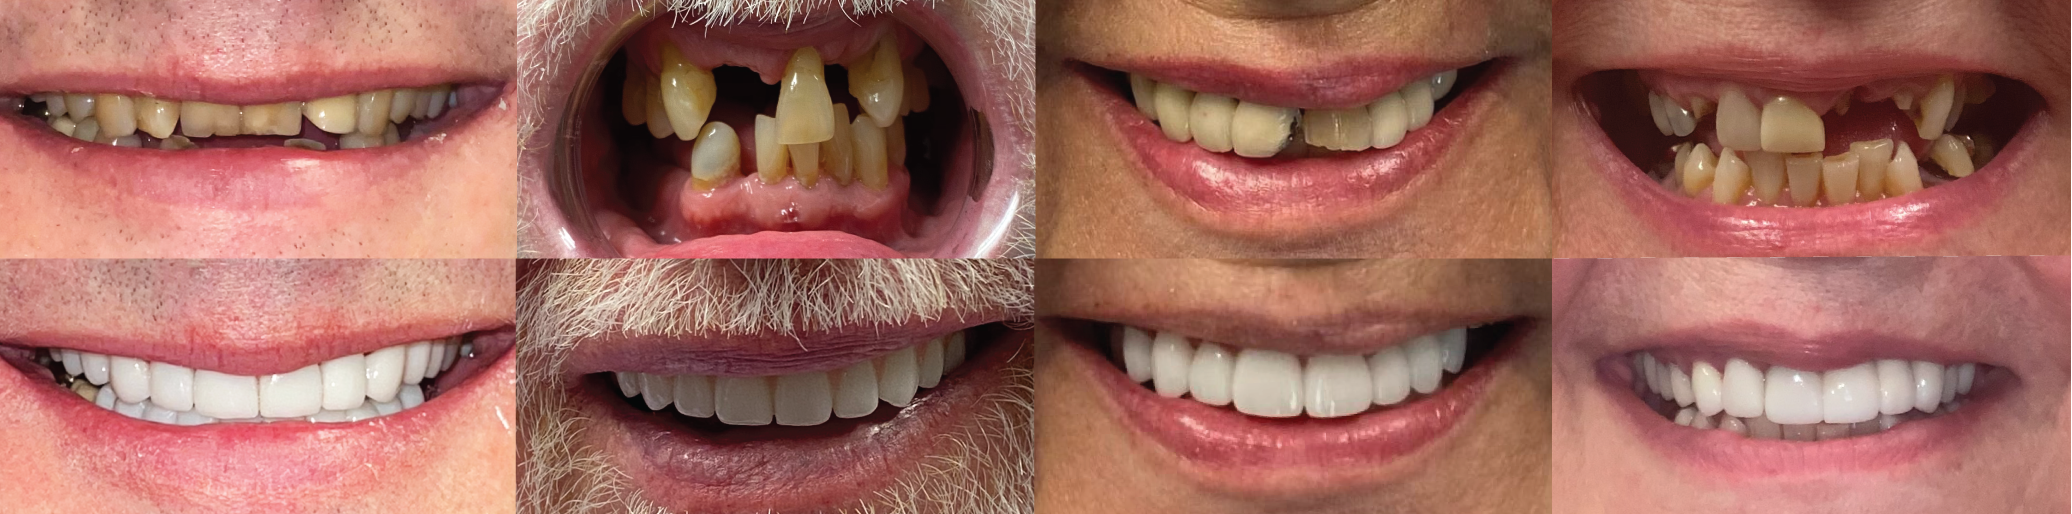 Full mouth dental implants from Troy Family Dental in Troy, Illinois